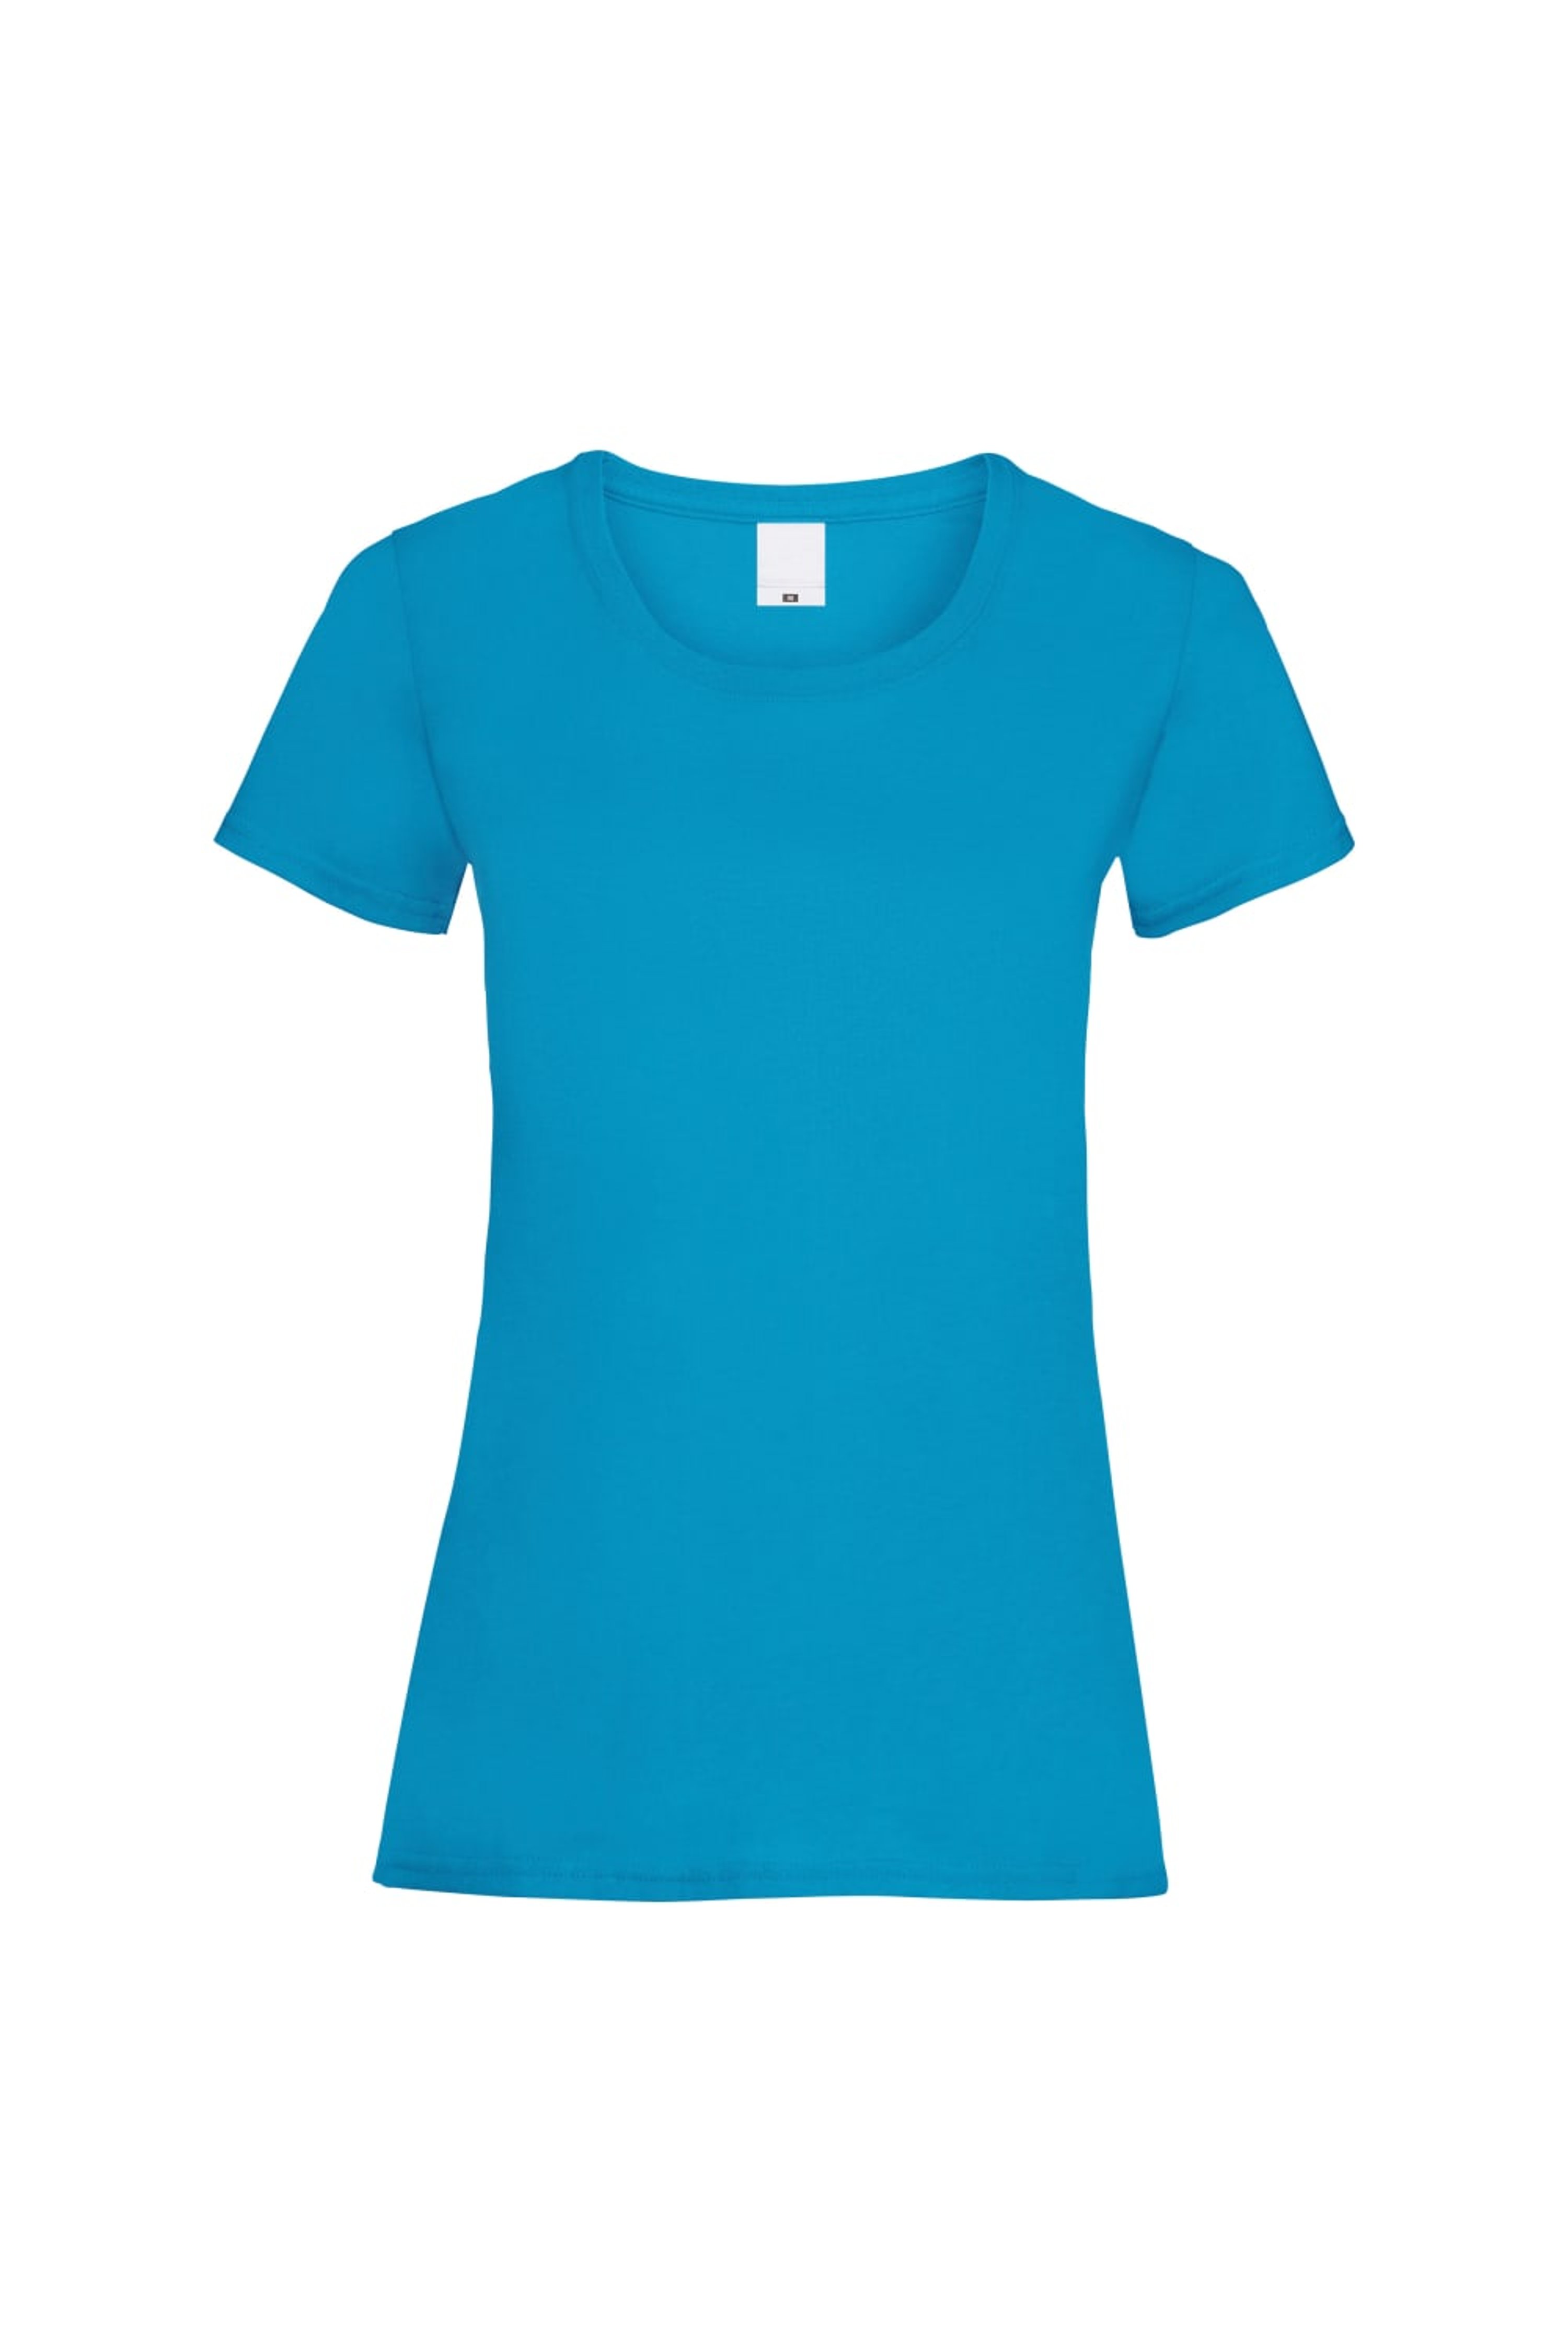 UNIVERSAL TEXTILES UNIVERSAL TEXTILES WOMENS/LADIES VALUE FITTED SHORT SLEEVE CASUAL T-SHIRT (CYAN)